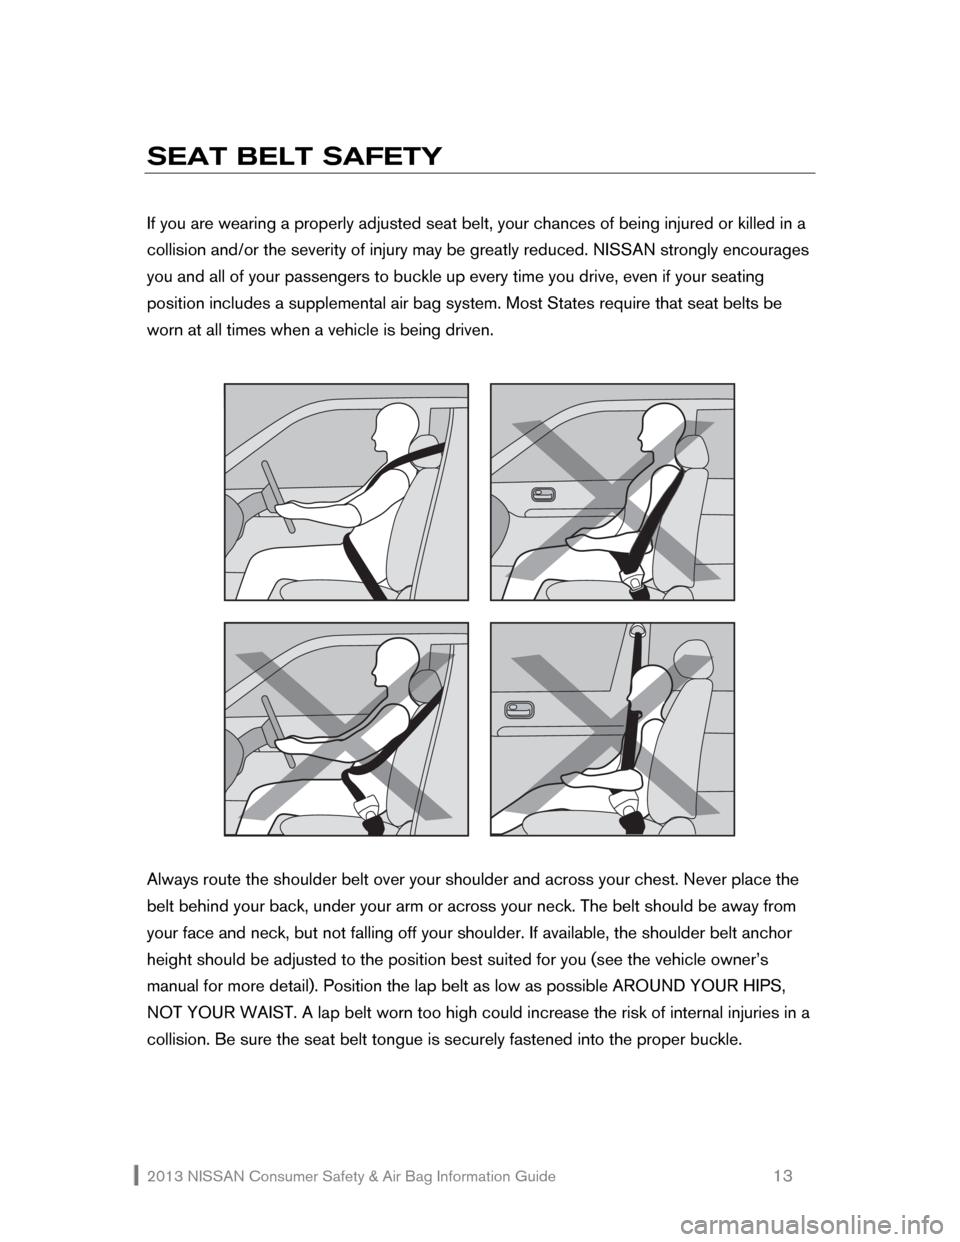 NISSAN XTERRA 2013 N50 / 2.G Consumer Safety Air Bag Information Guide 2013 NISSAN Consumer Safety & Air Bag Information Guide                                                   13 
SEAT BELT SAFETY 
 
If you are wearing a properly adjusted seat belt, your chances of bein